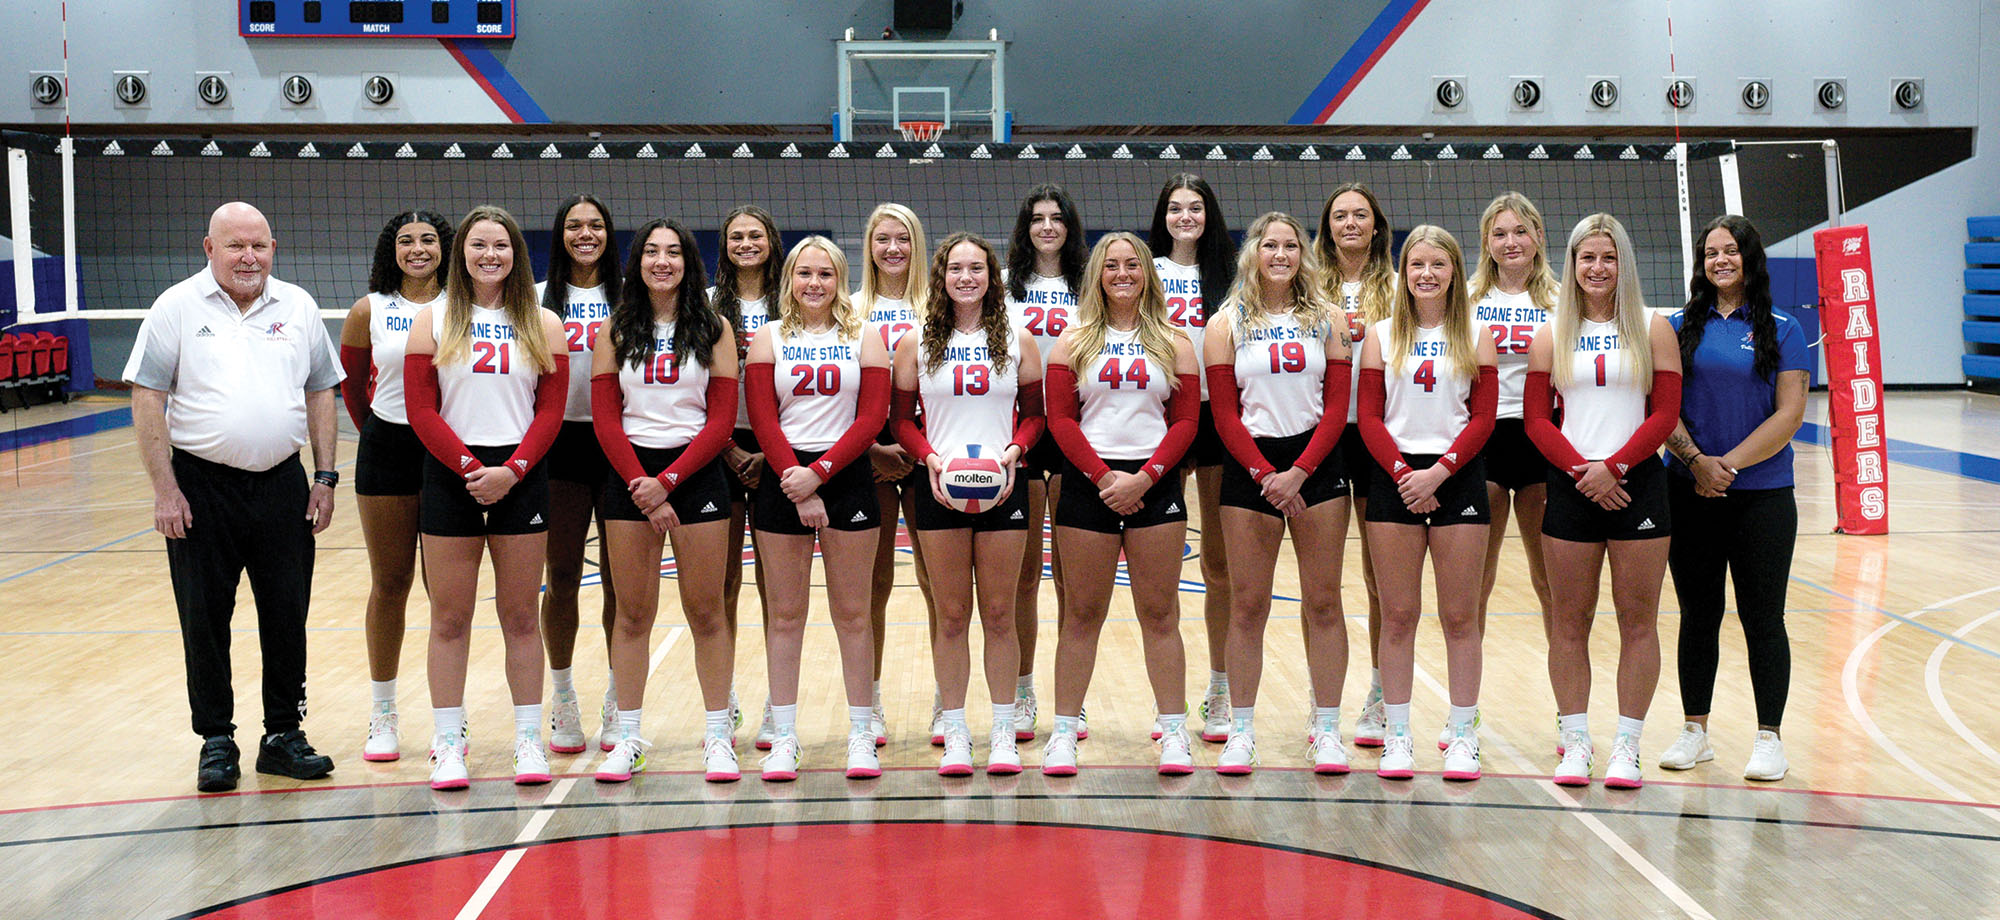 ROANE STATE VOLLEYBALL STANDS AT 12-0; RECEIVING VOTES ON NATIONAL POLL